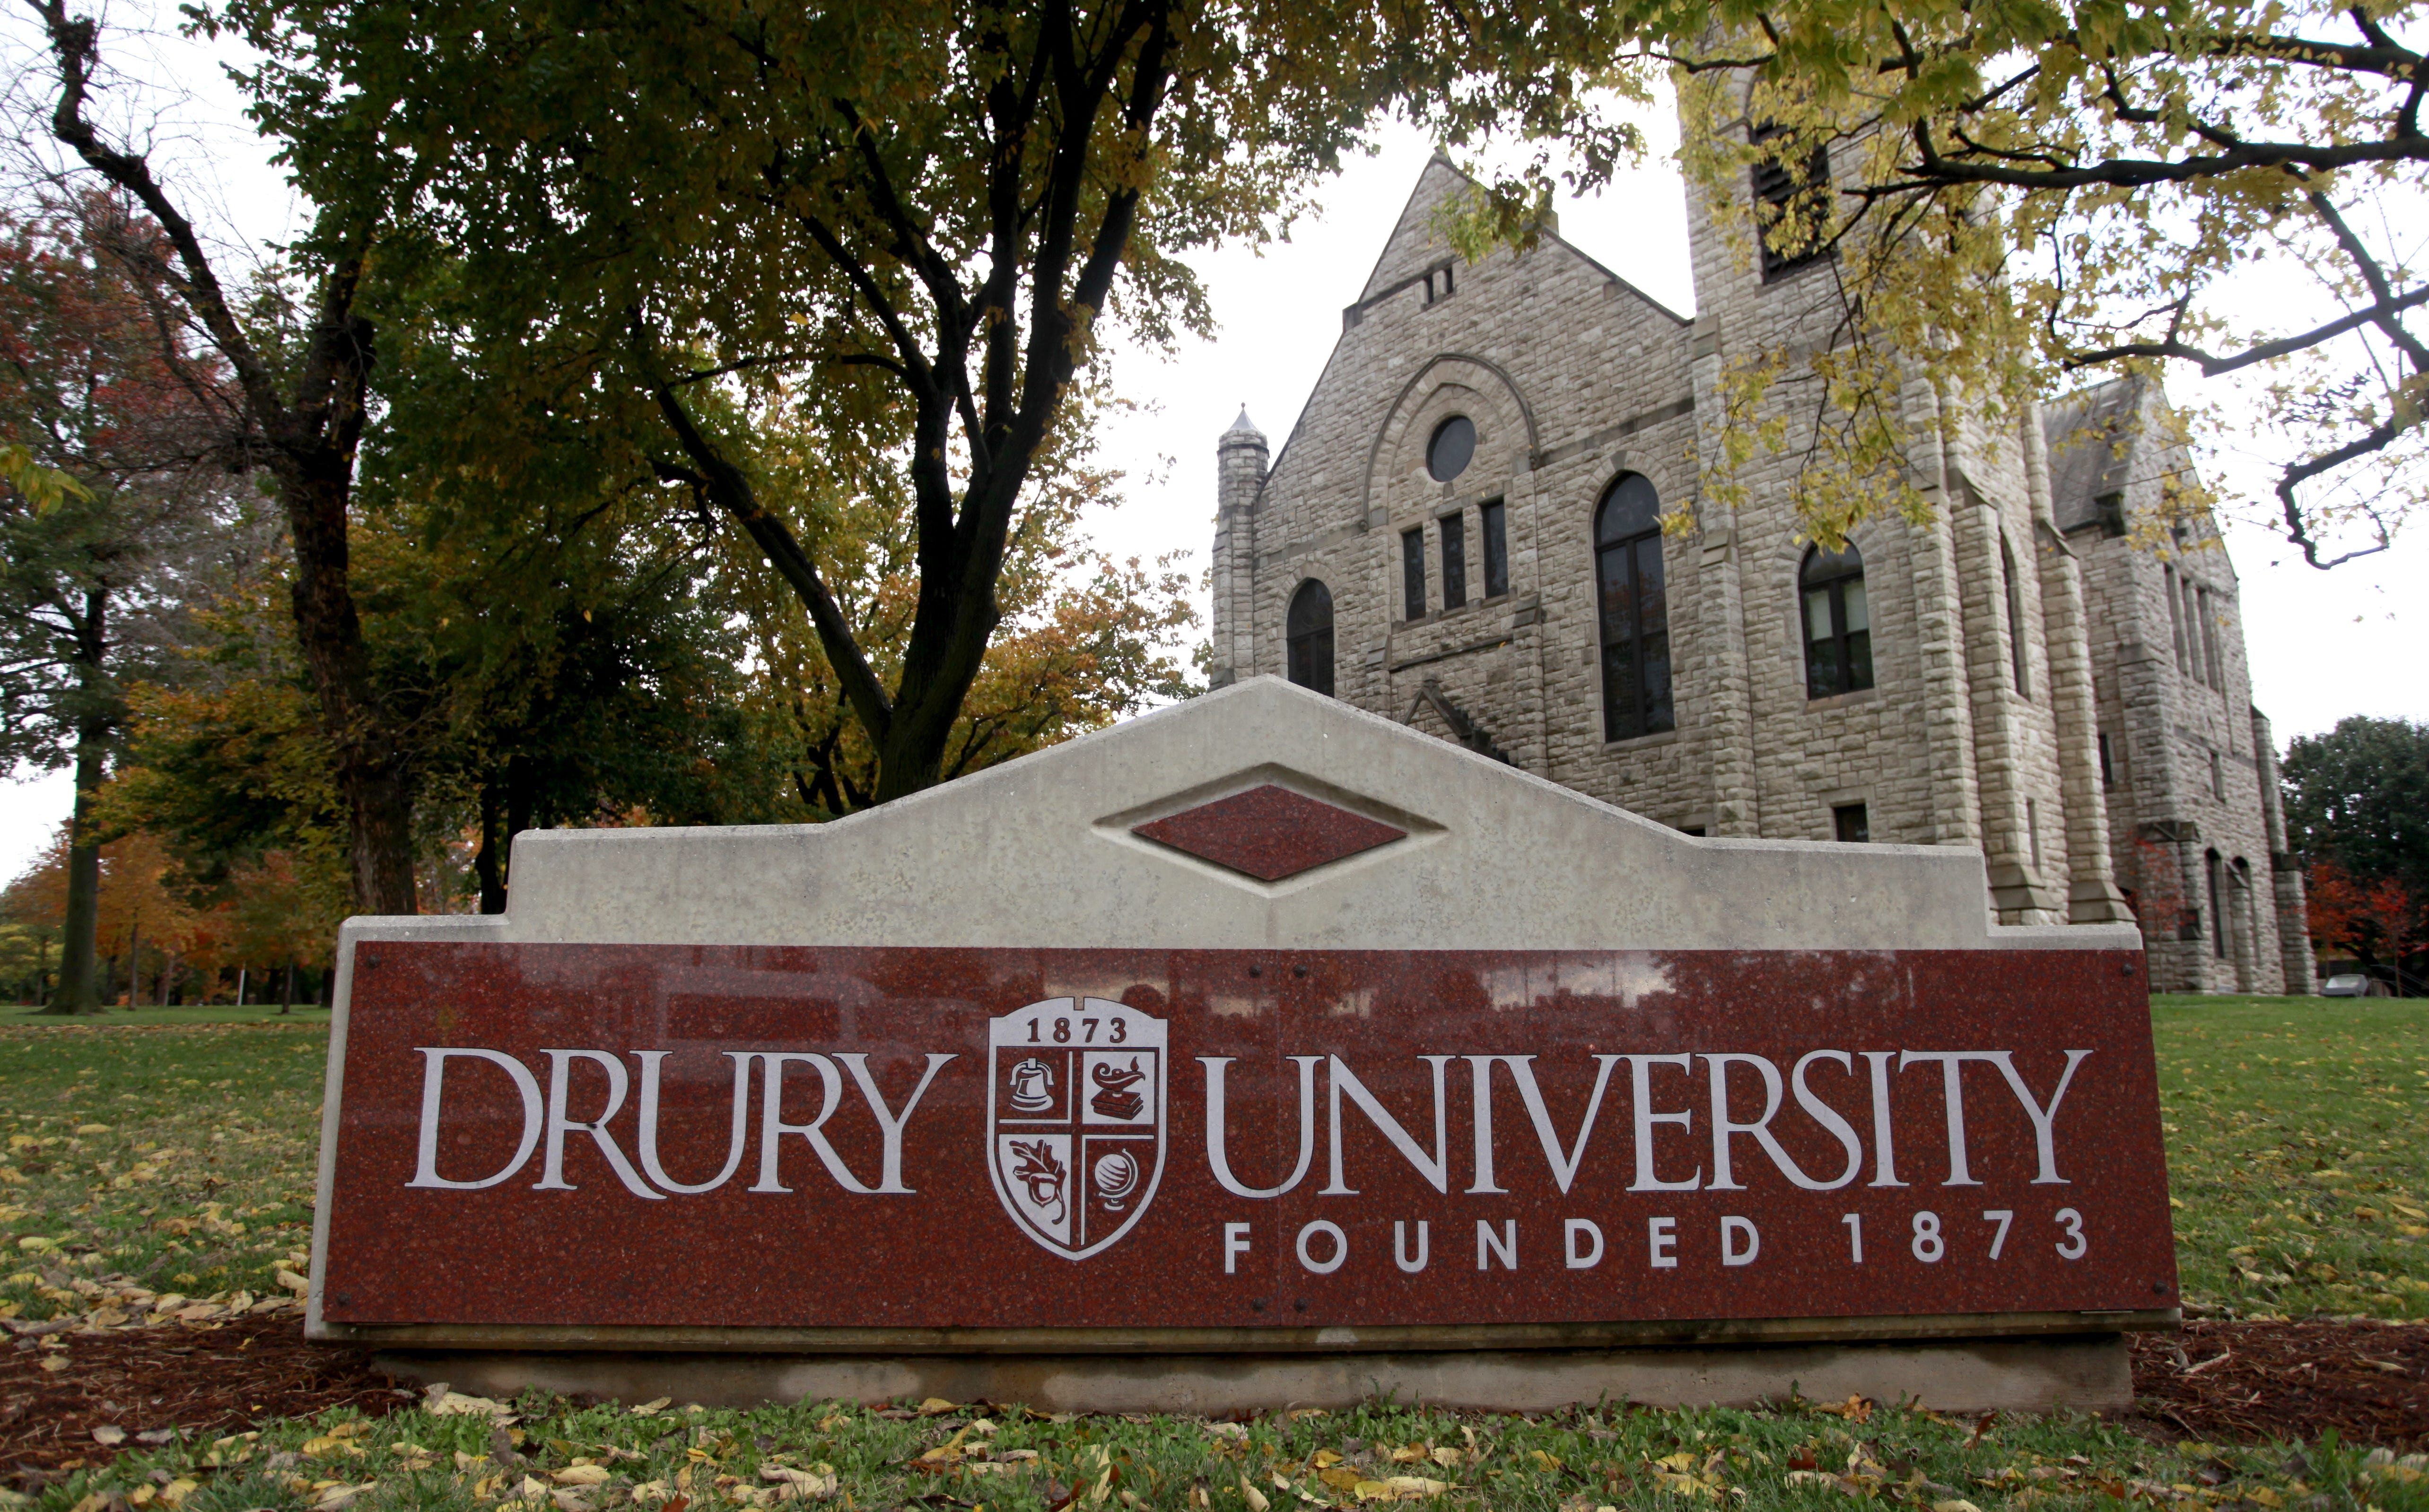 Drury gained $9.4 million in fundraising last year, up nearly 25 percent